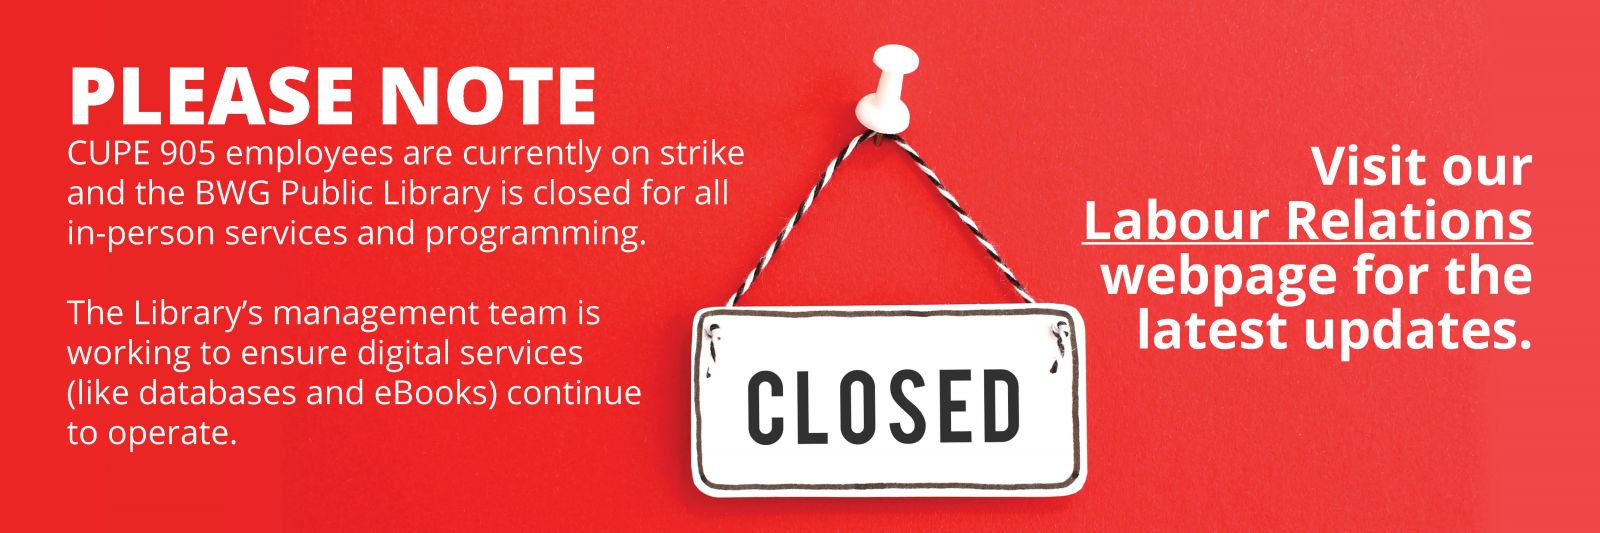 Please Note: CUPE 905 employees are currently on strike and the BWG Public Library is closed for all in-person services and programming. The Library's management team is working to ensure digital services (like databases and ebooks) continue to operate. Visit our Labour Relations webpage for the latest updates.